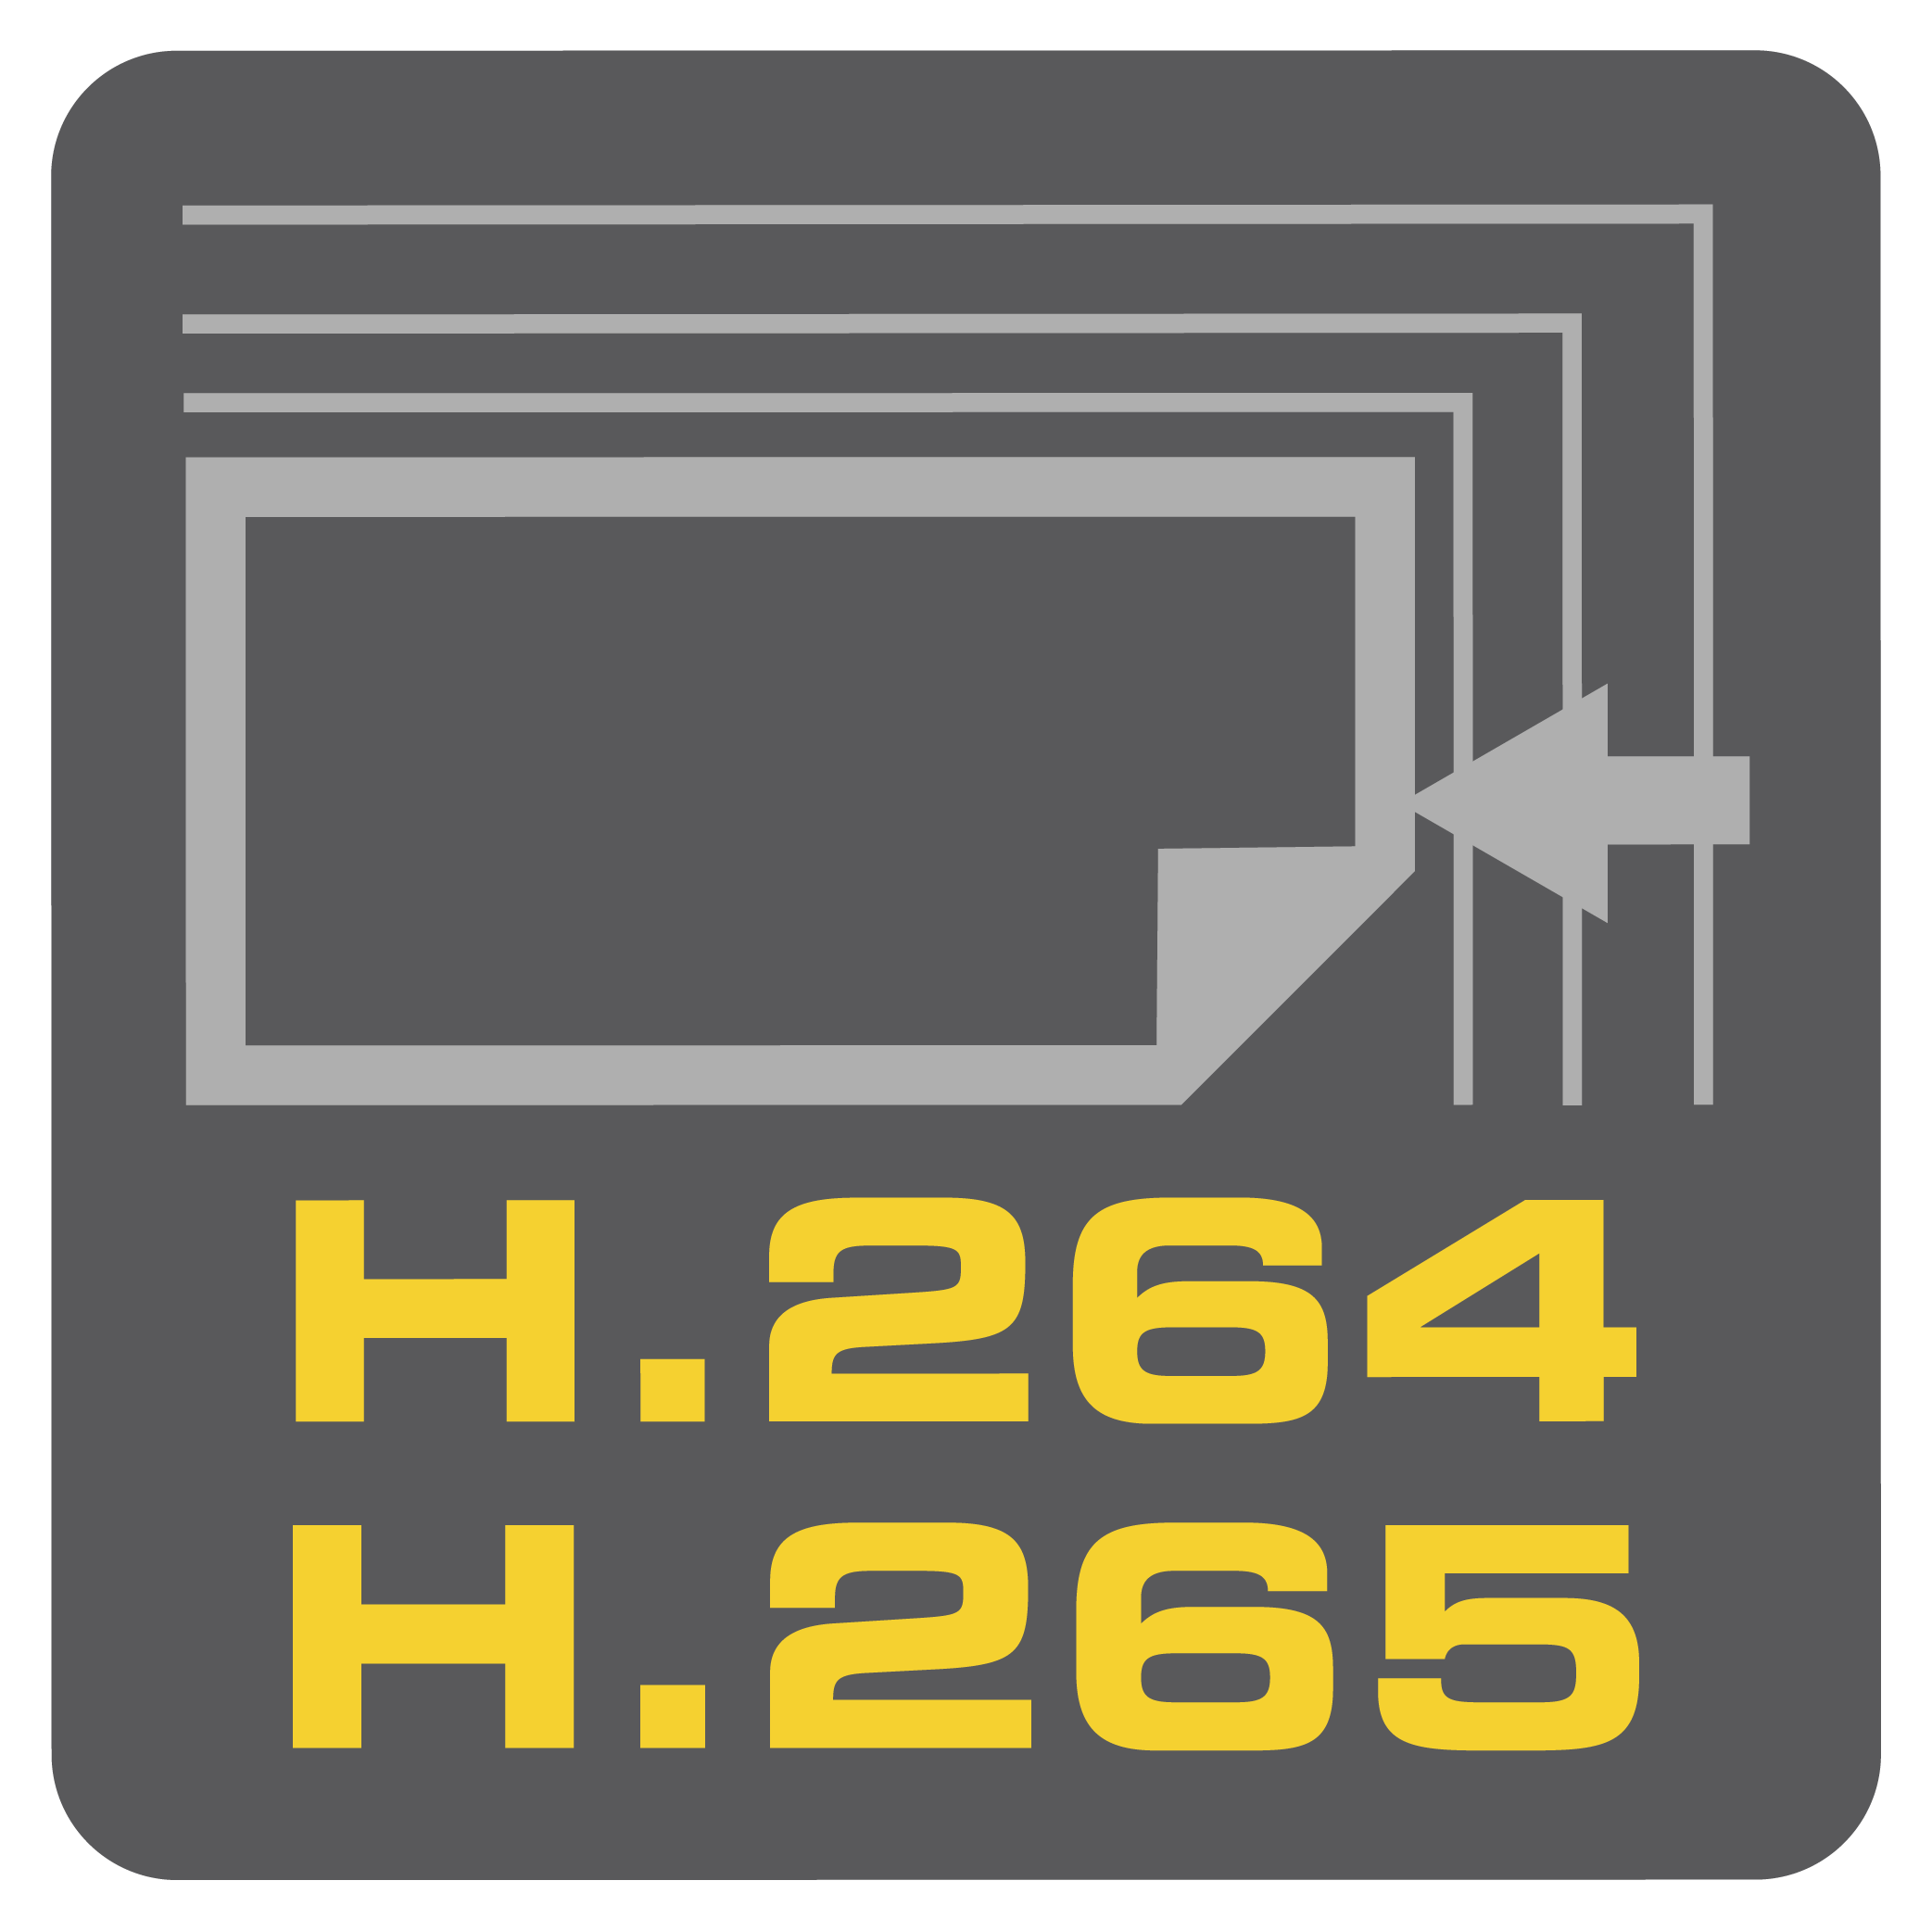 icon showing h264 and h265